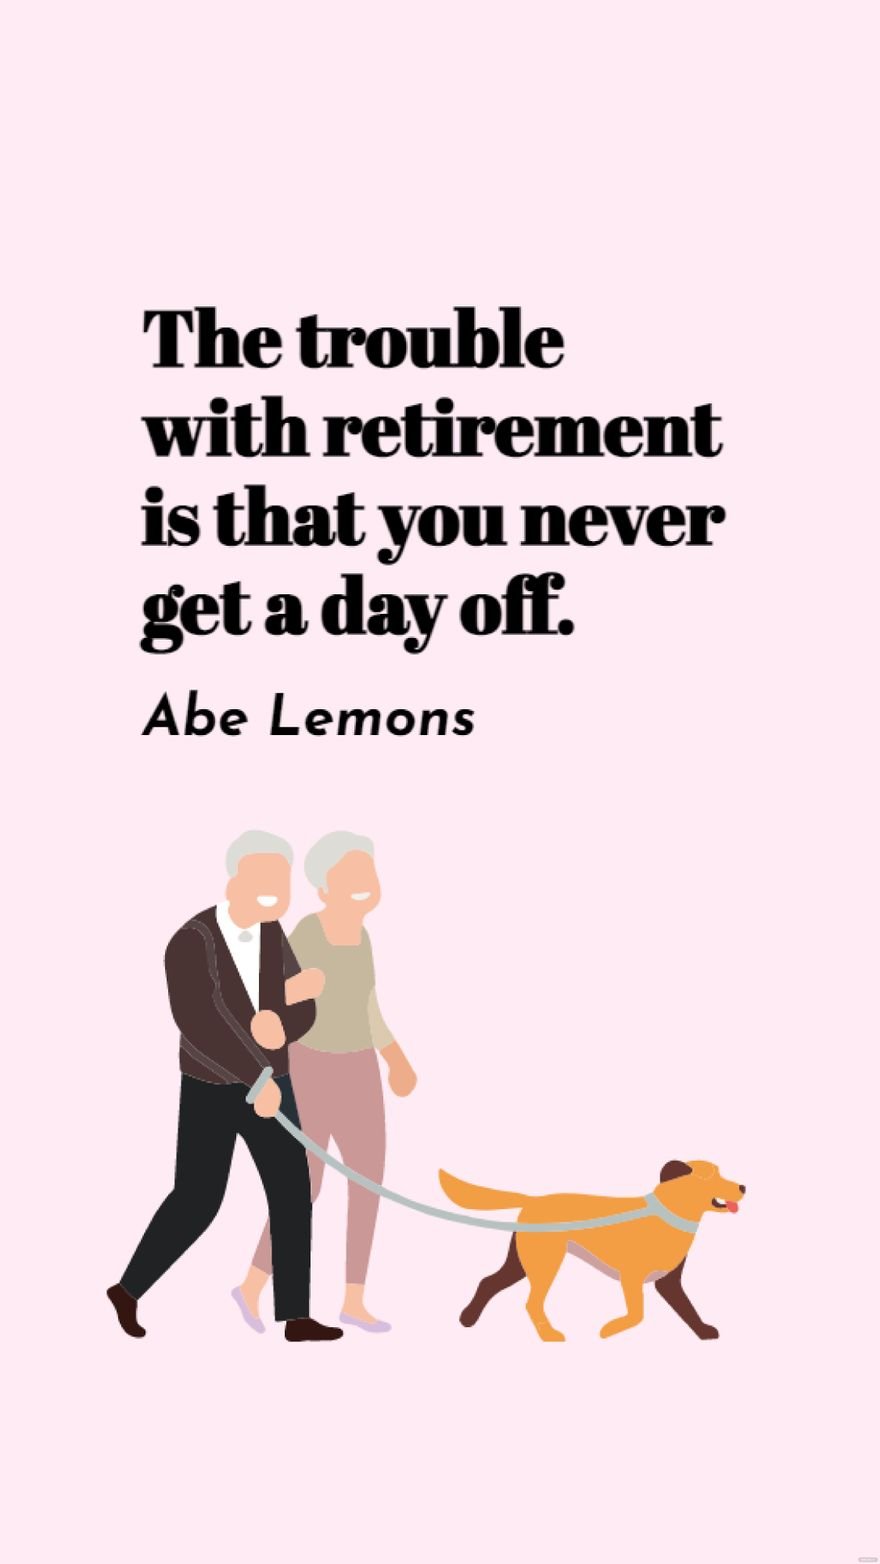 Free Abe Lemons - The trouble with retirement is that you never get a day off.